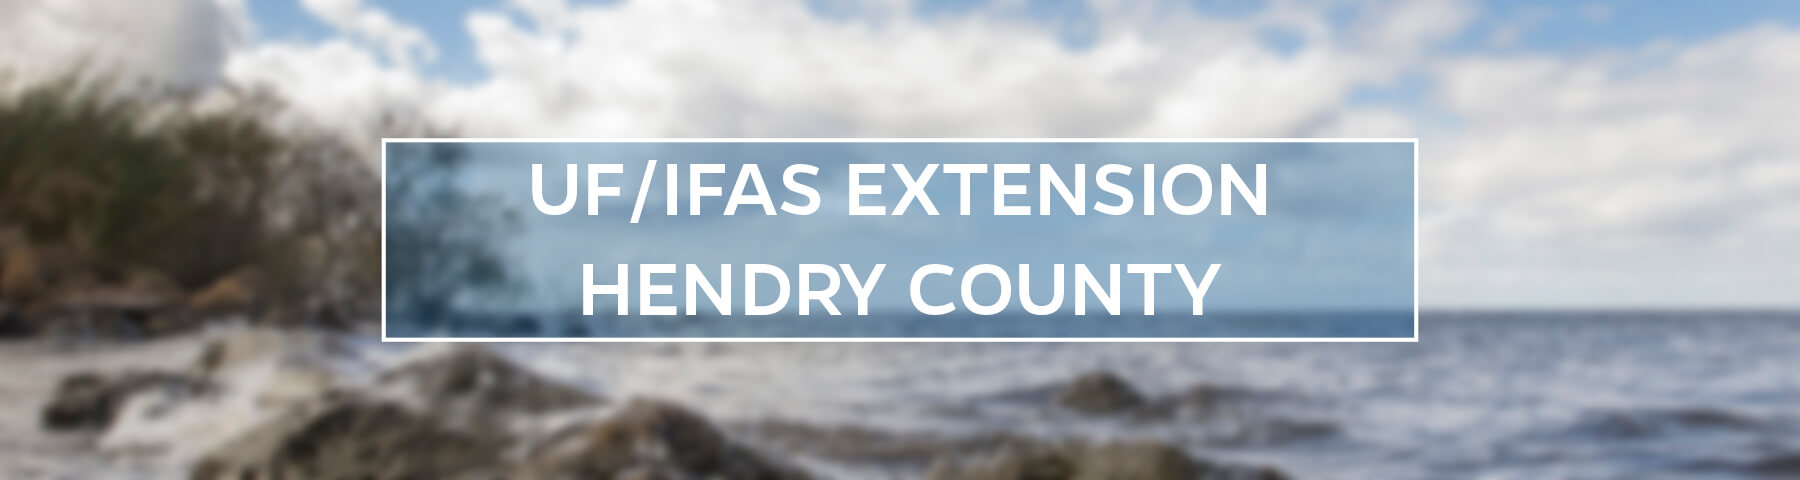 UF/IFAS Extension Hendry County